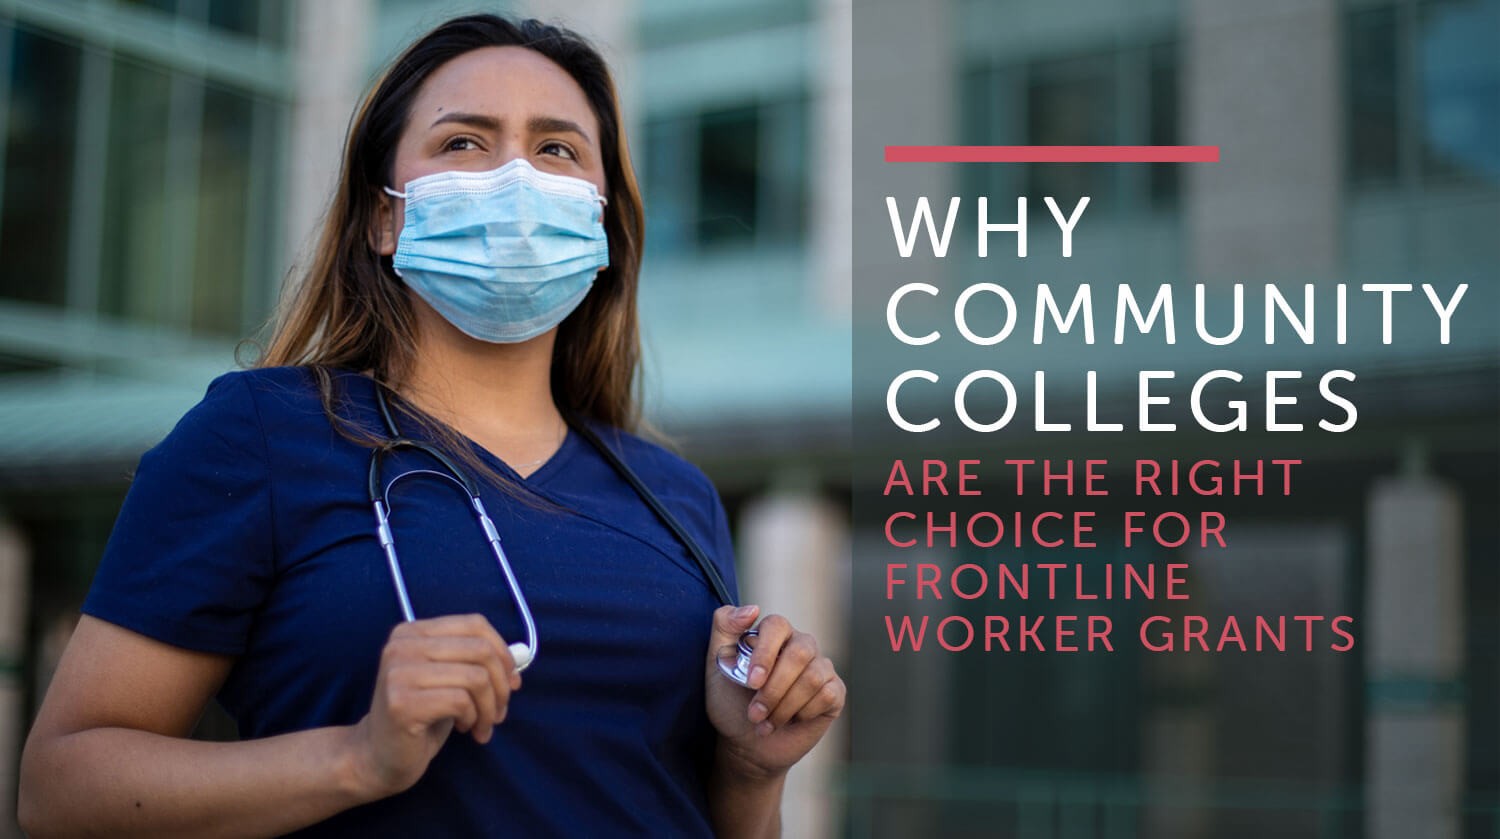 Why Community Colleges Are the Right Choice for Frontline Worker Grants